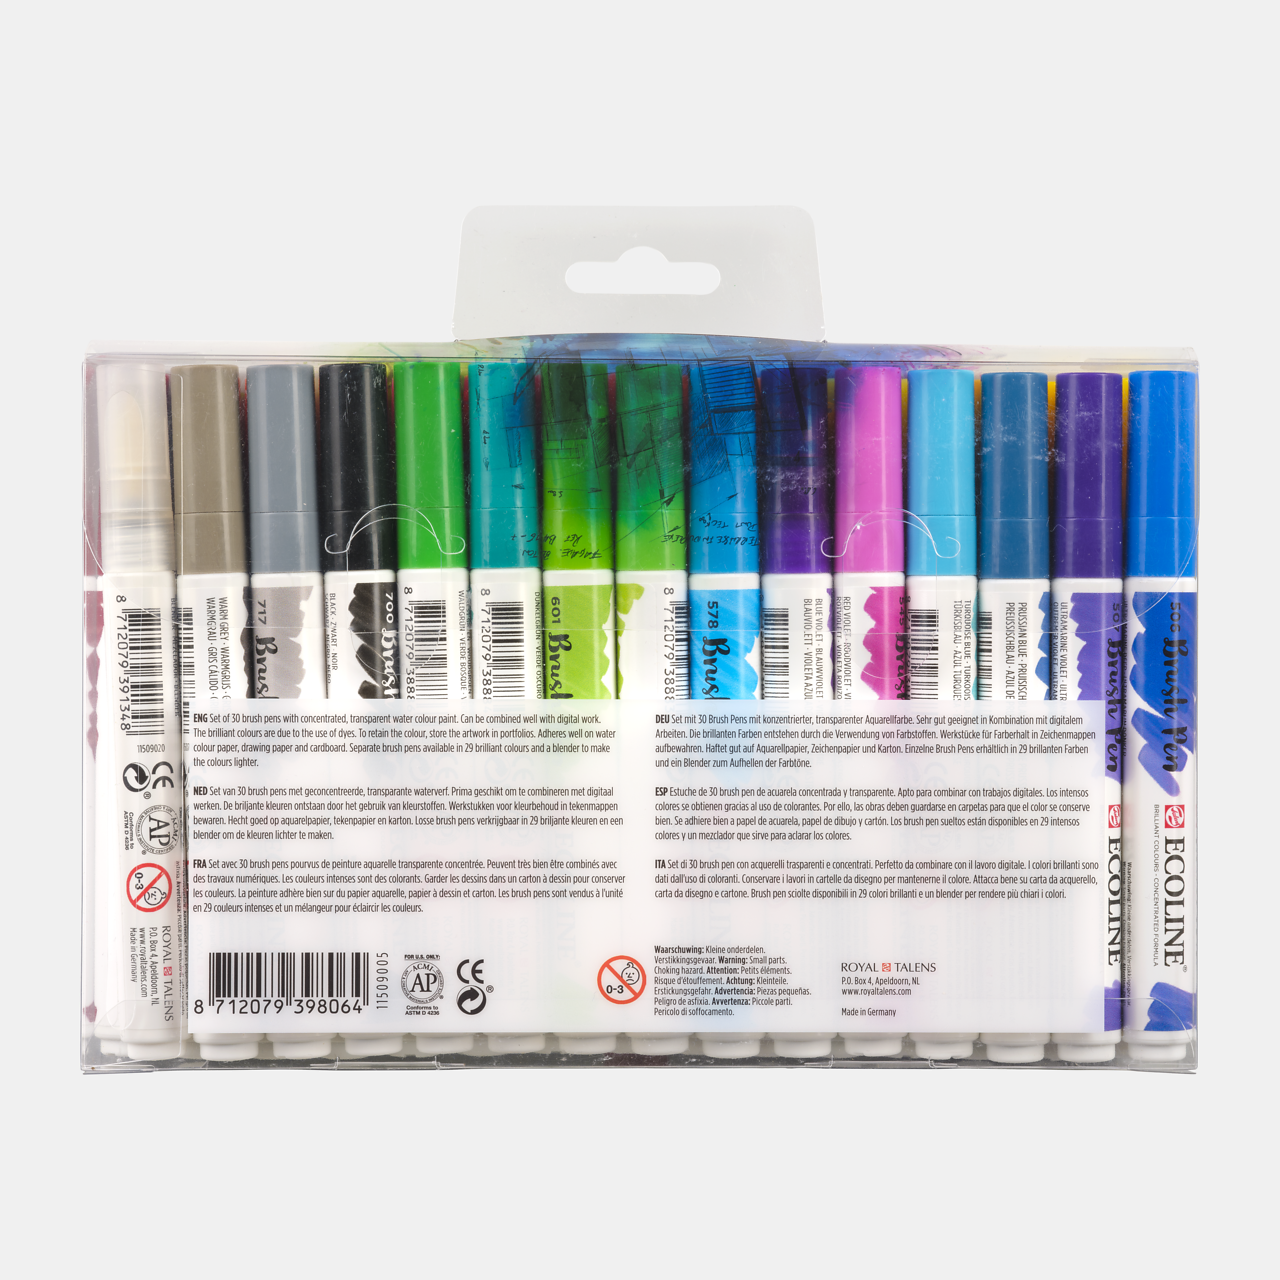 Ecoline Brush Pen Swatches - Royal Talens Watercolor Pens 